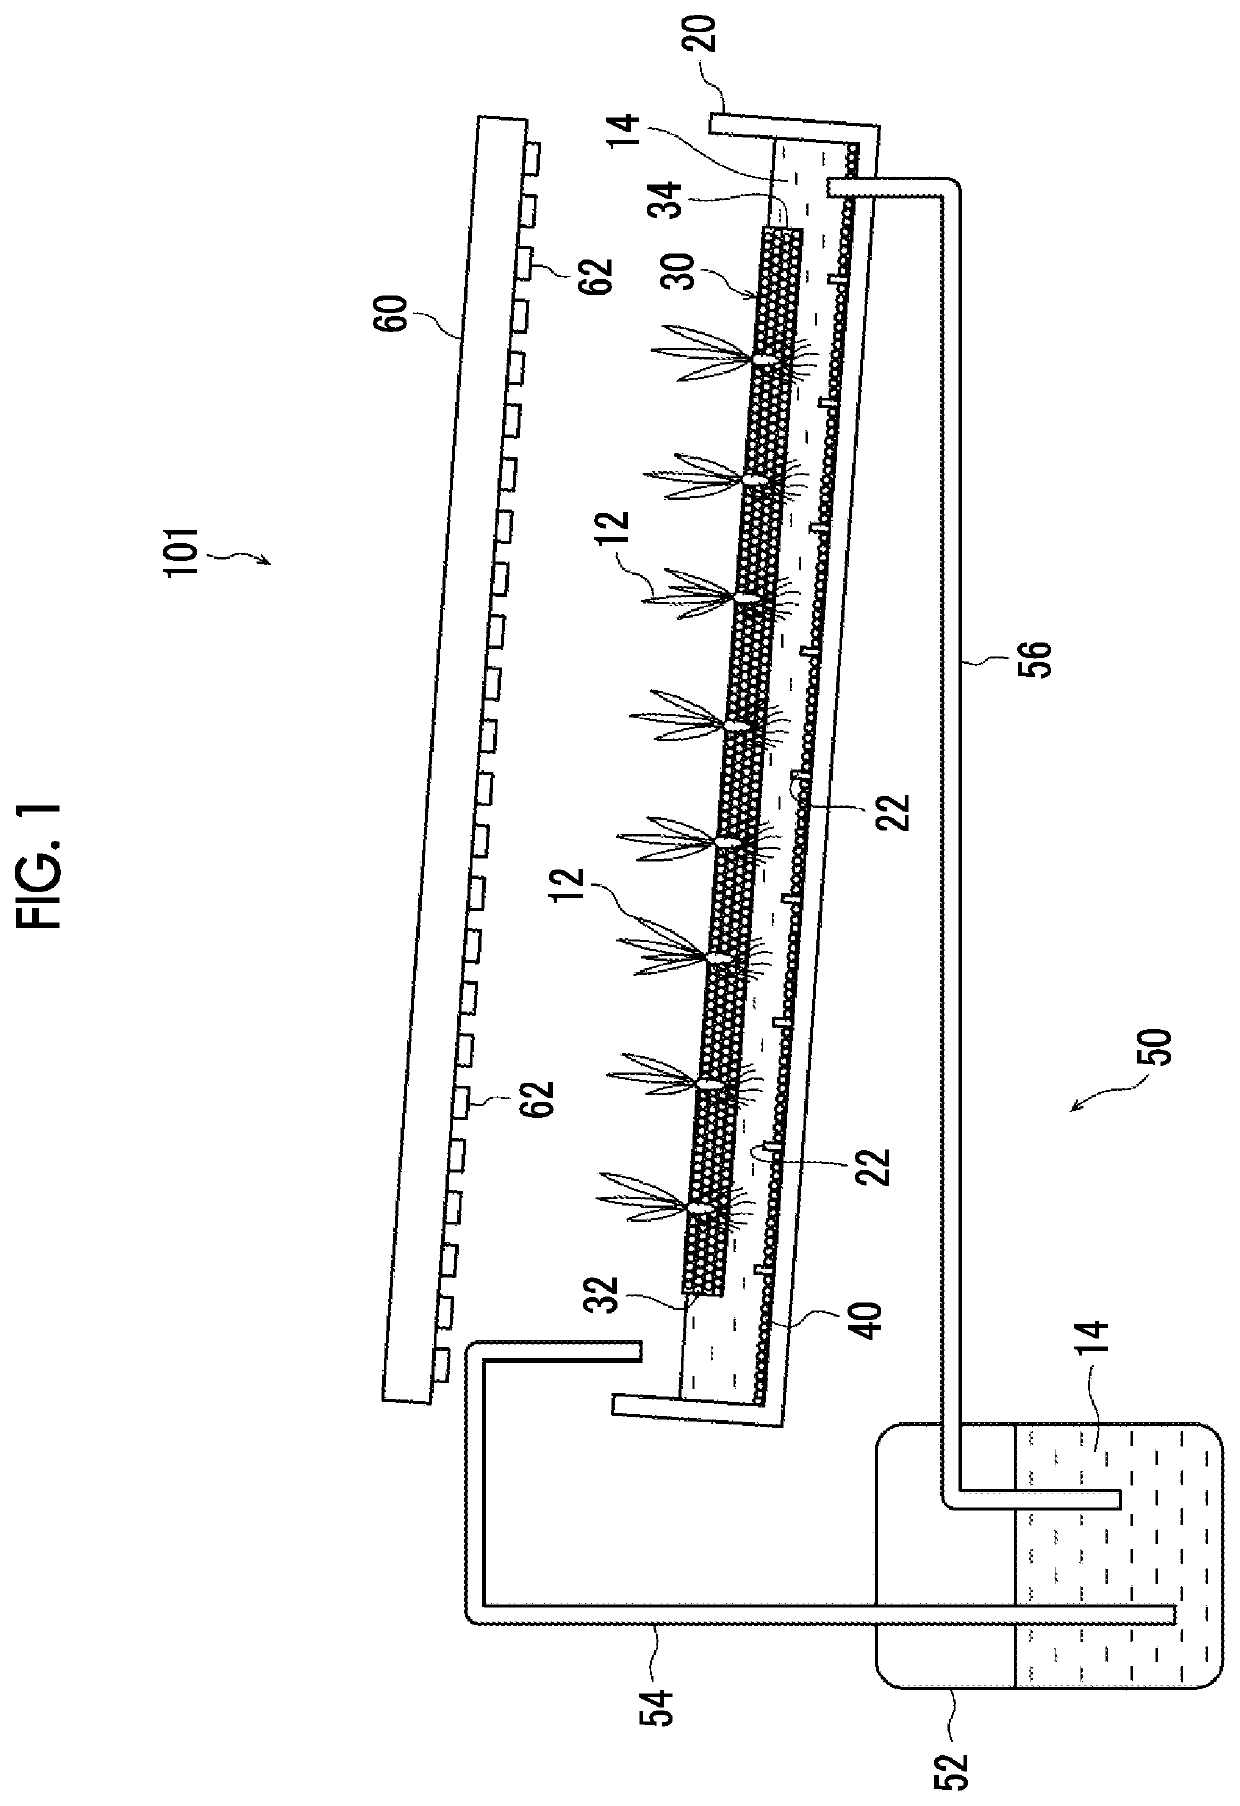 Water purification particles, water culture apparatus, and water purification apparatus